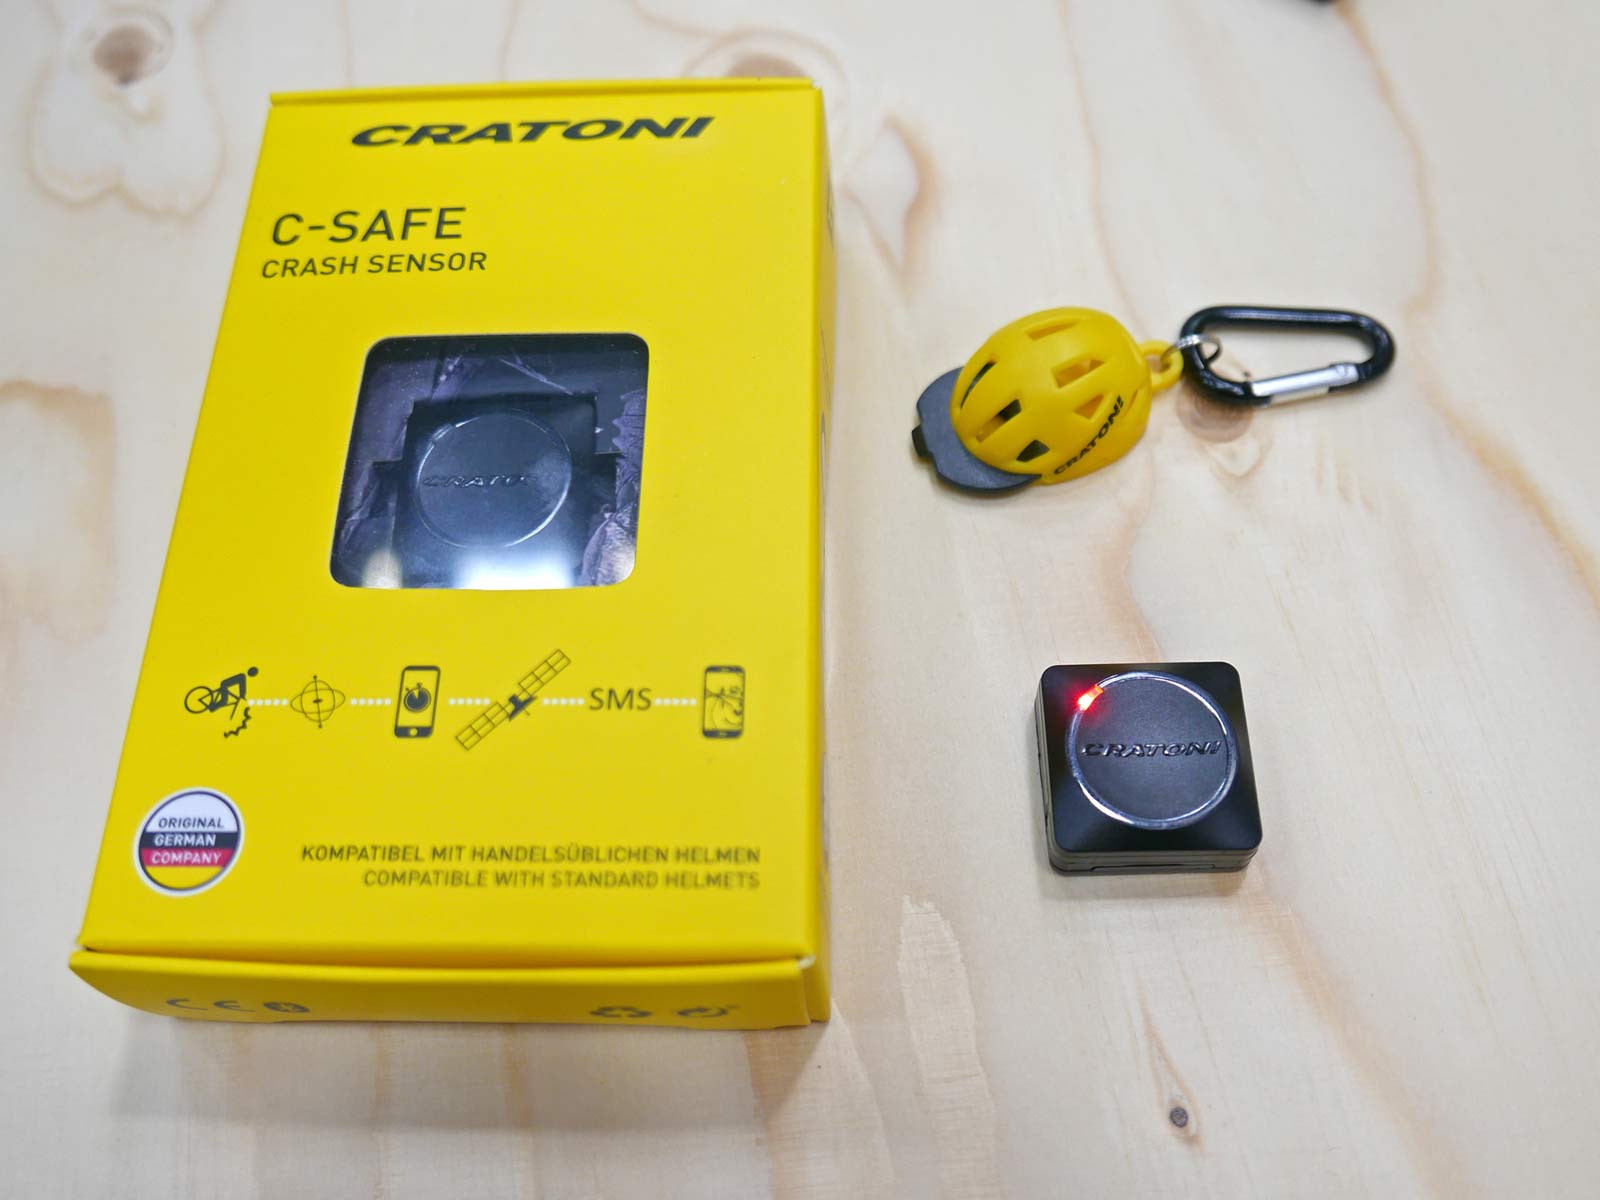 Cratoni C-Safe crash sensor, add-on impact detection safety upgrade for any helmet, what's in teh box?